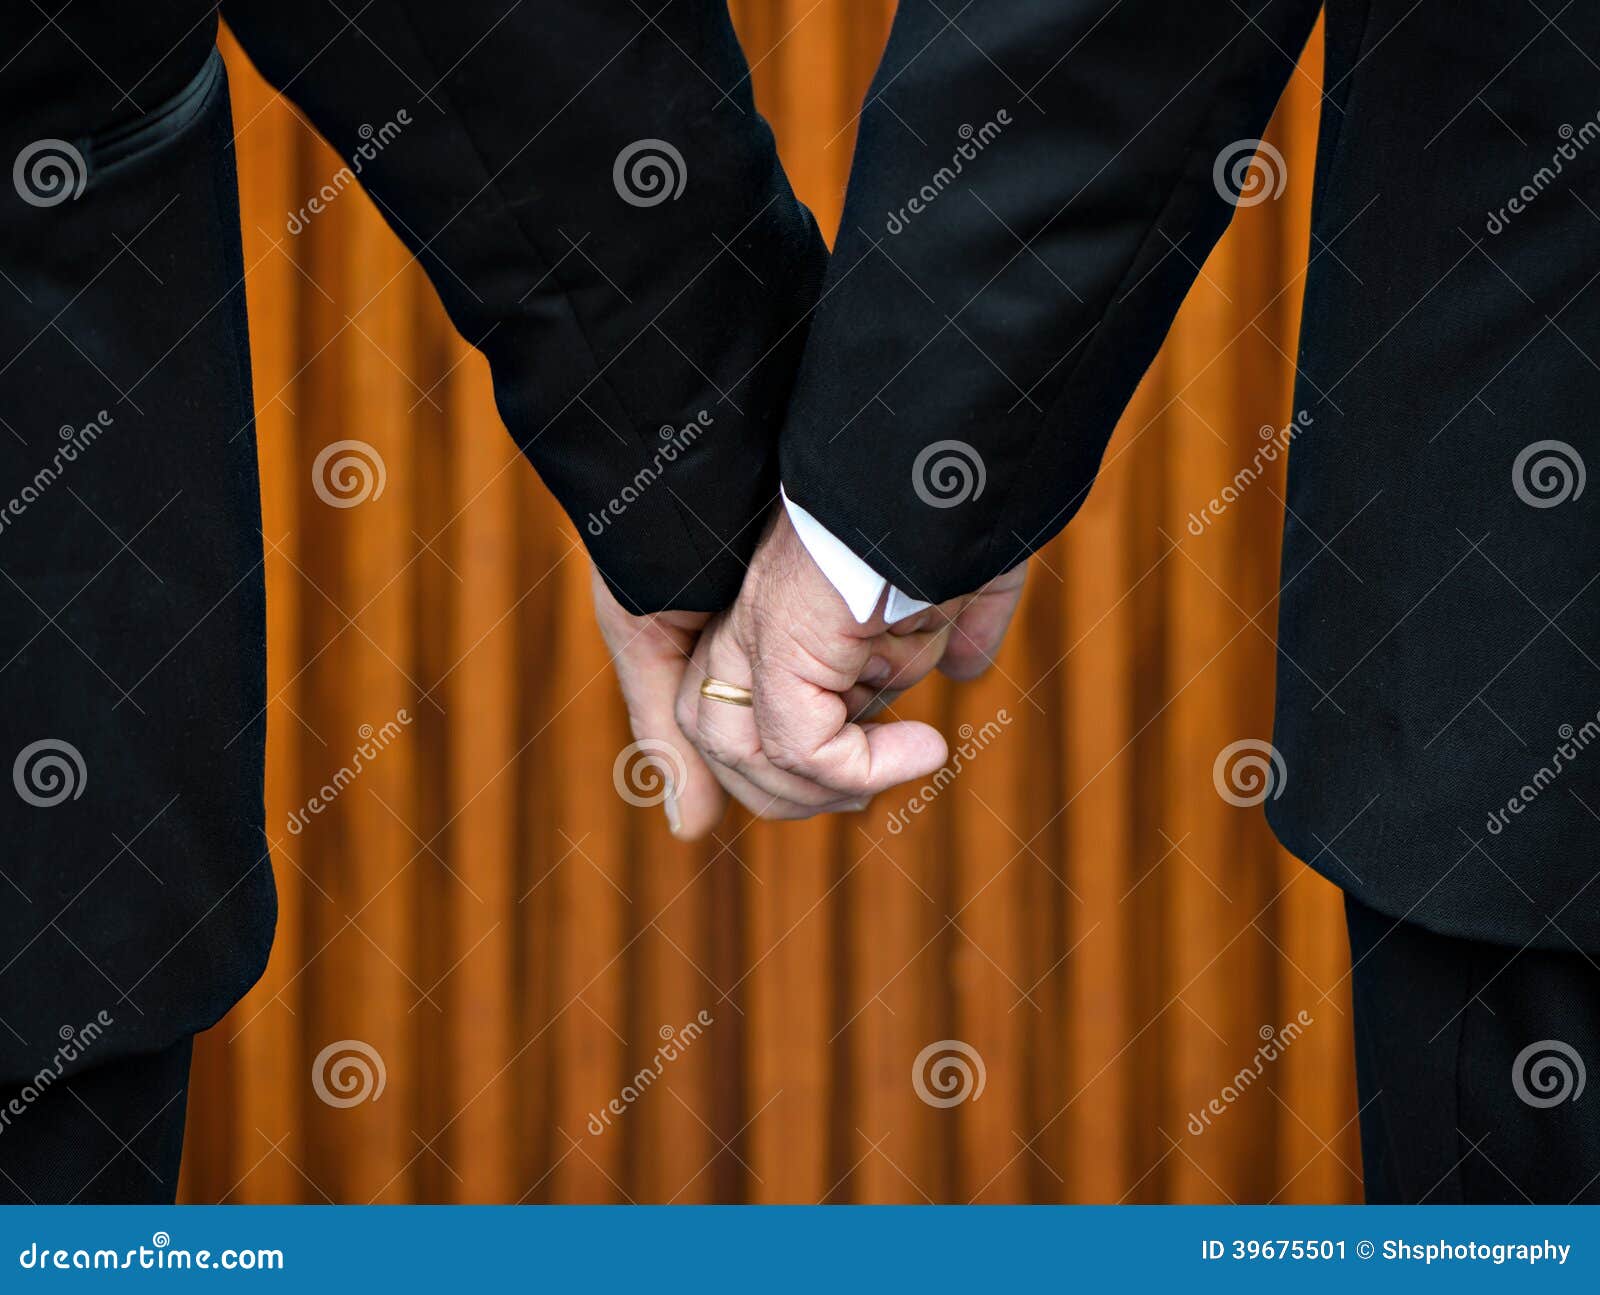 Same-Sex Marriage stock image picture